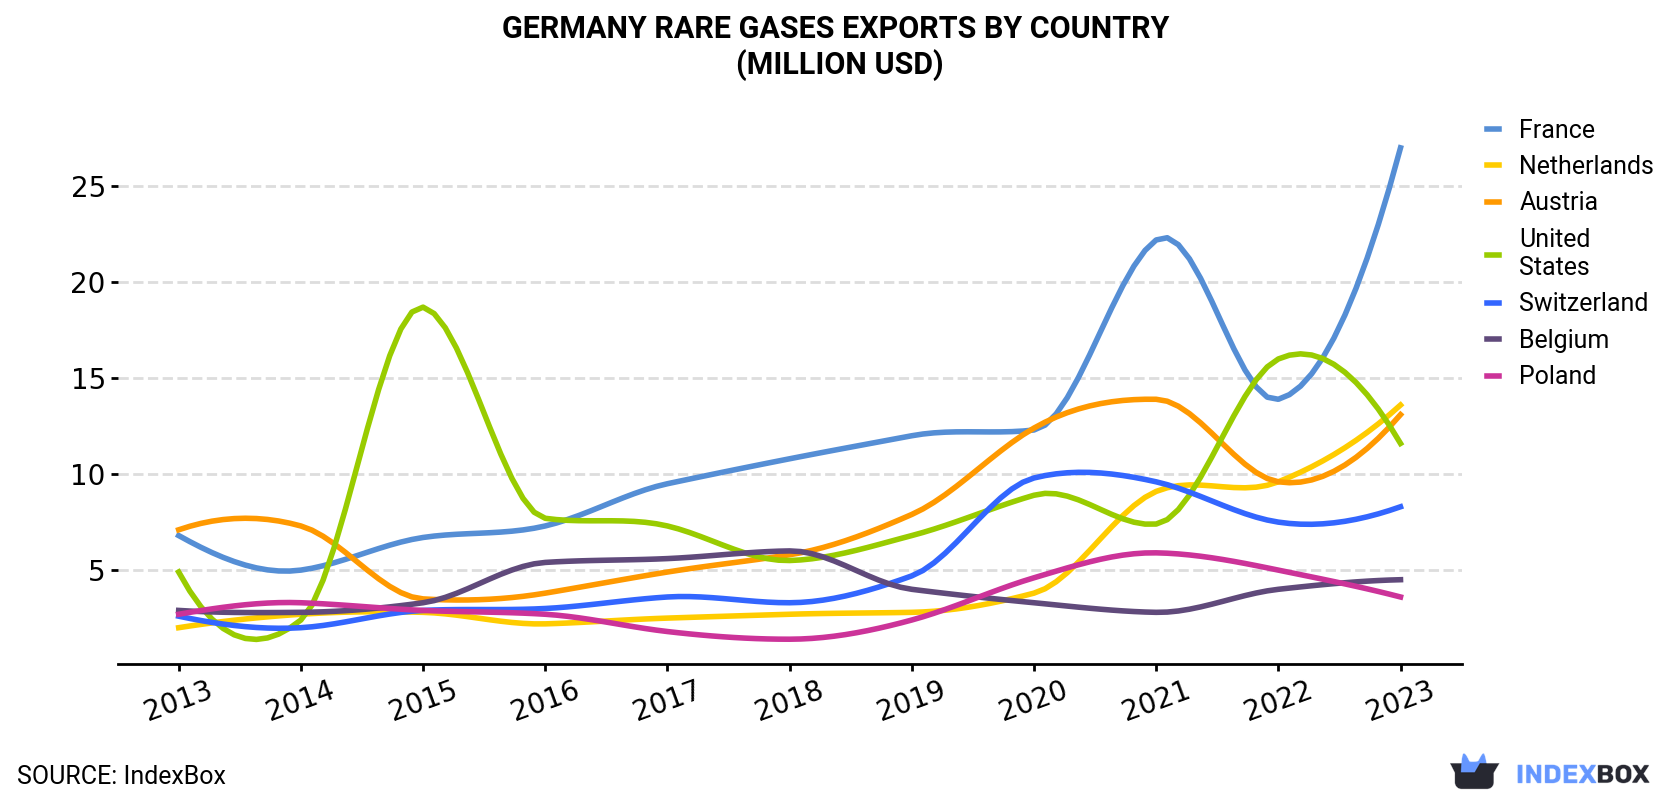 Germany Rare Gases Exports By Country (Million USD)